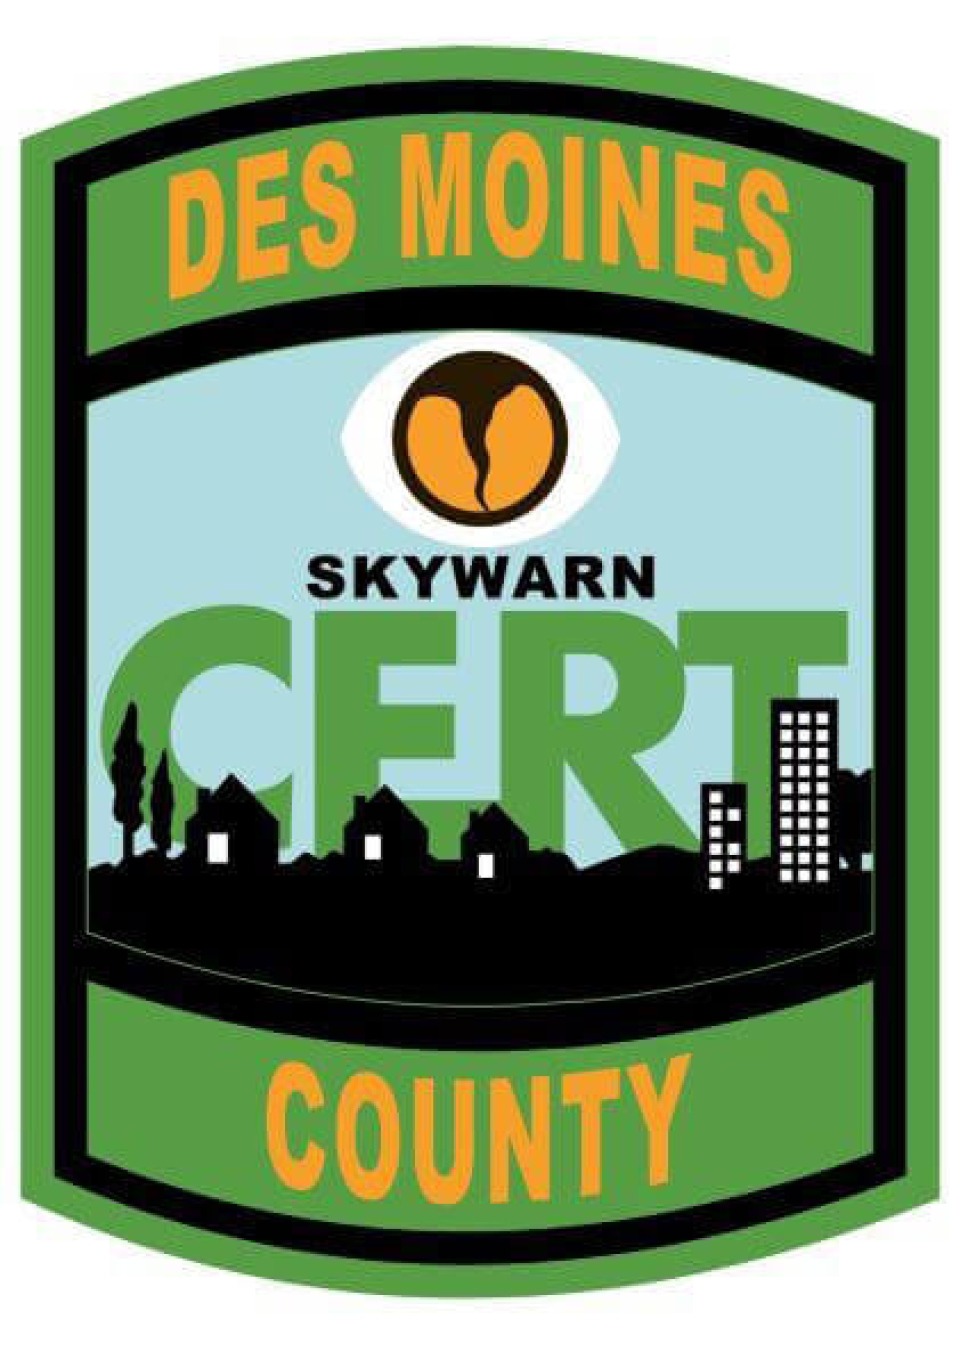 Des Moines County Community Emergency Response Team